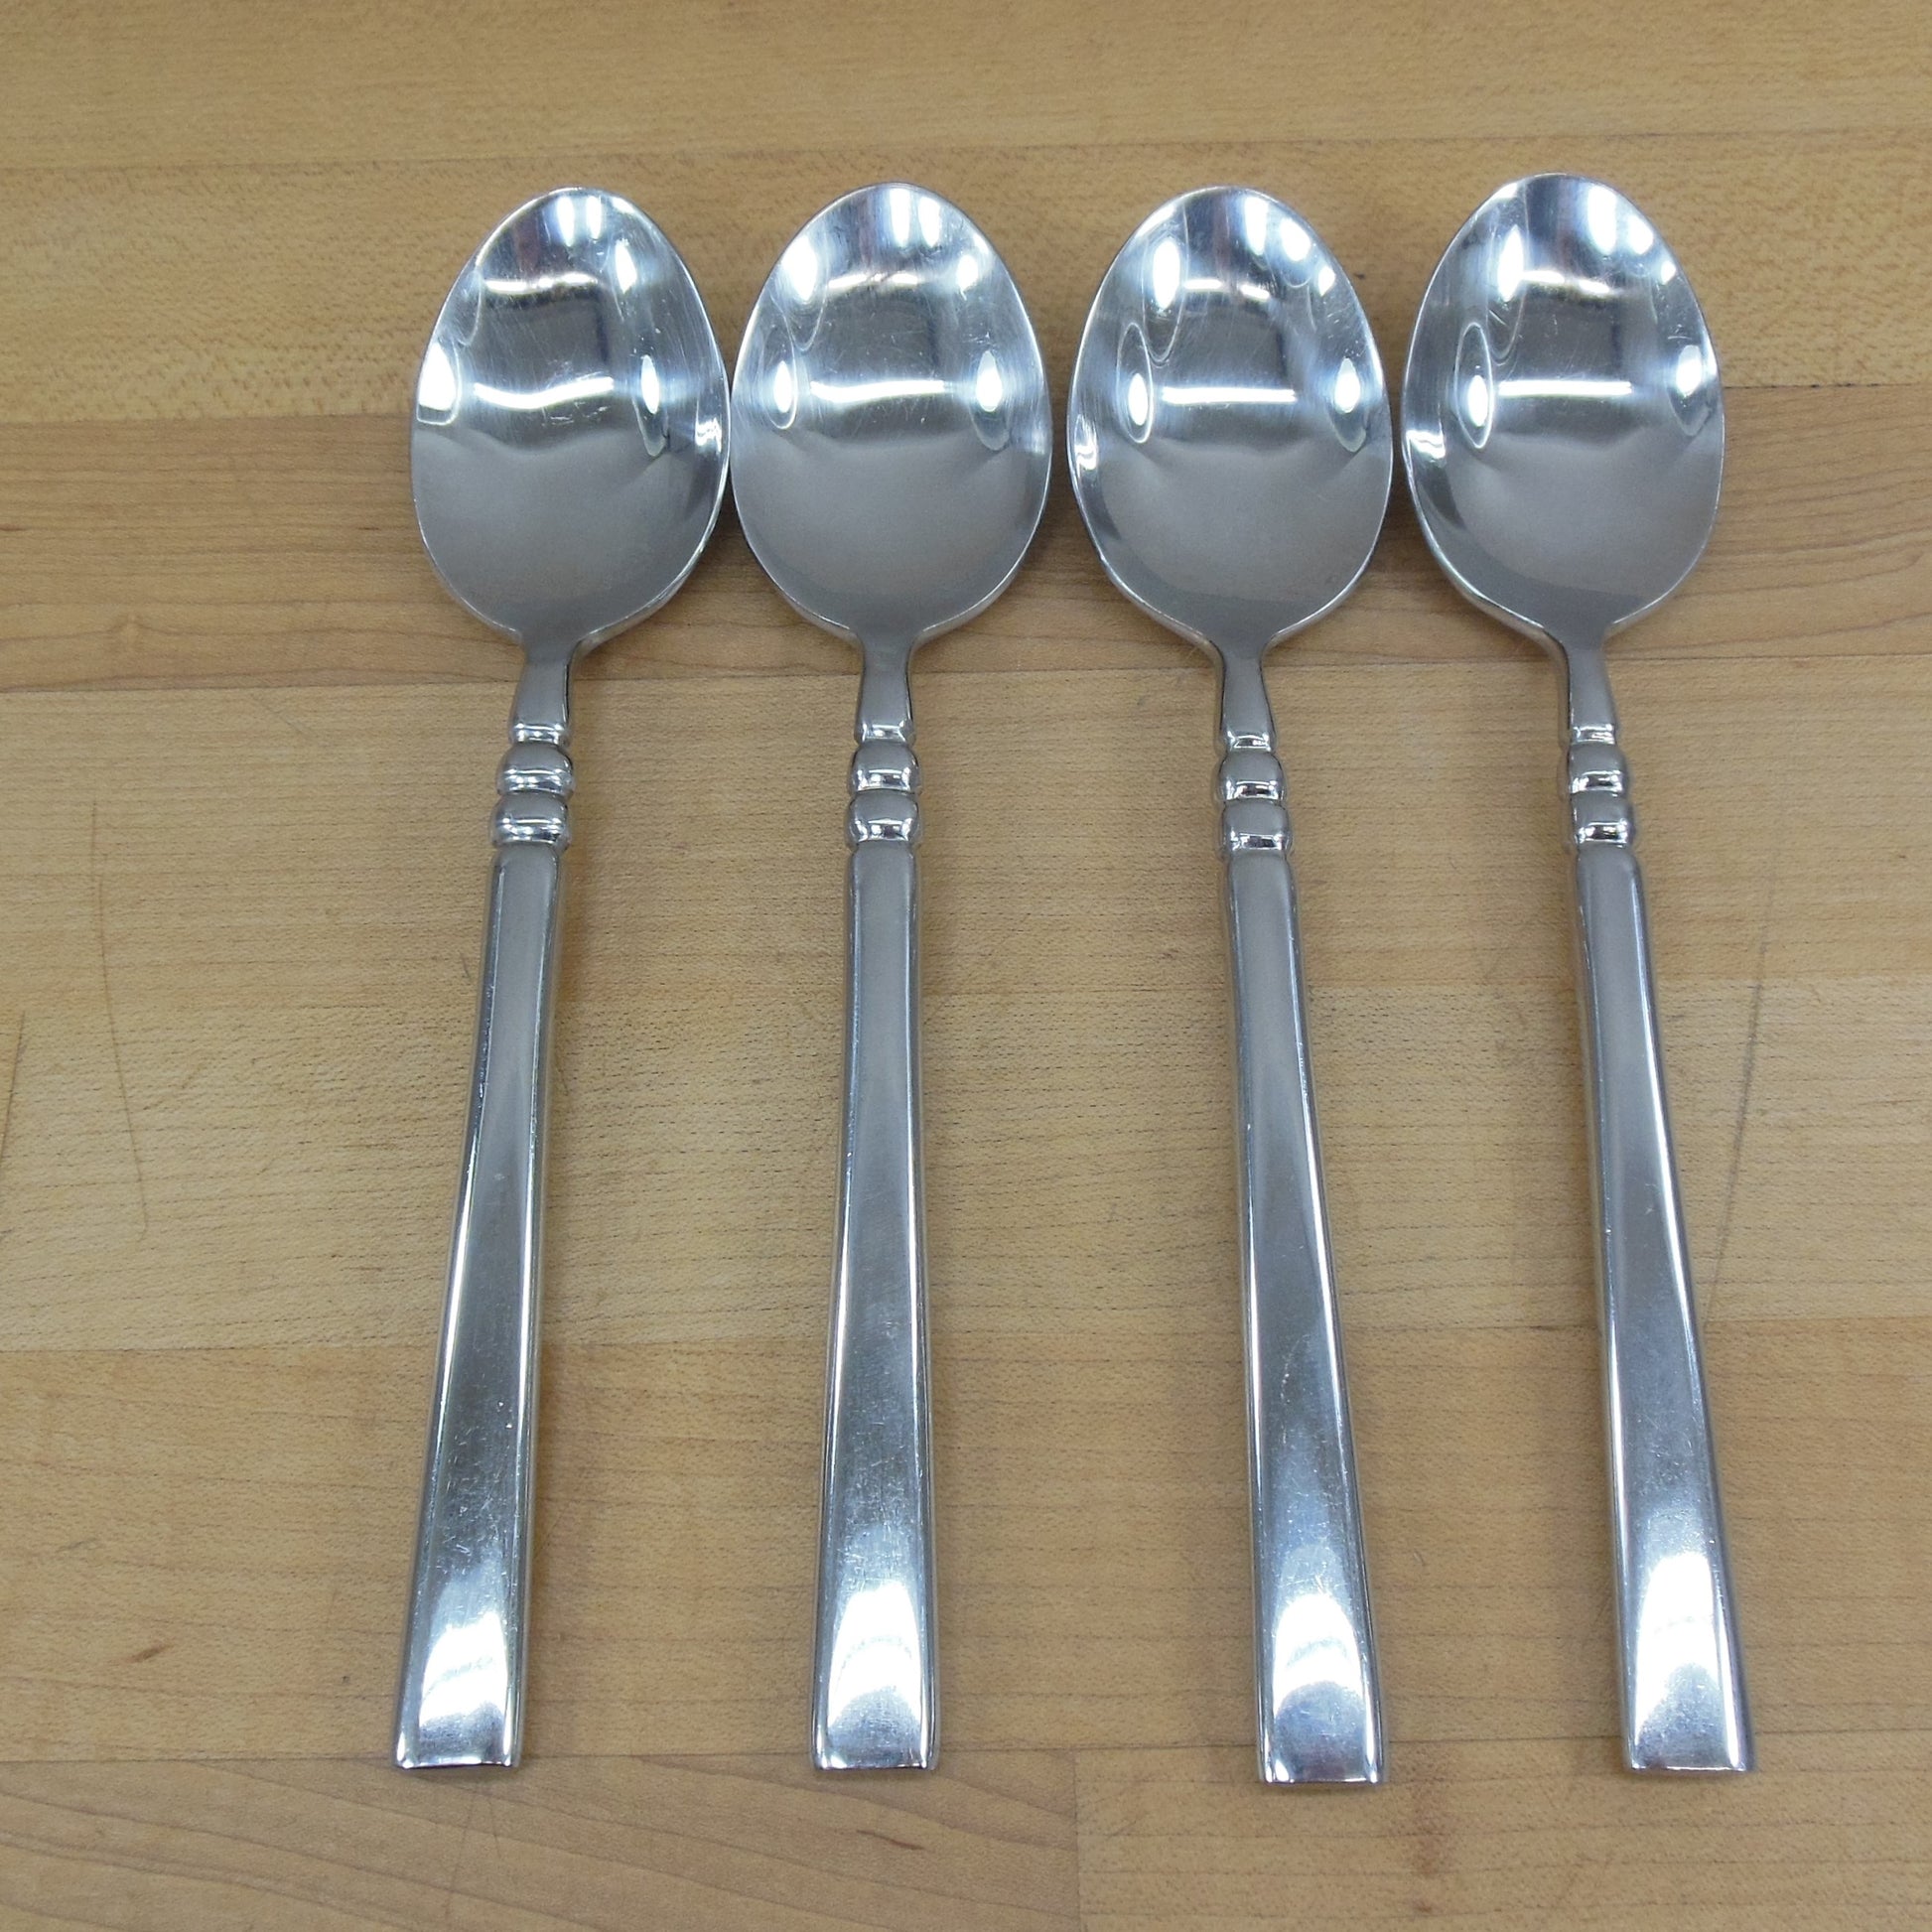 Oneida China Tortola Stainless Flatware - 4 Place/Soup Spoons